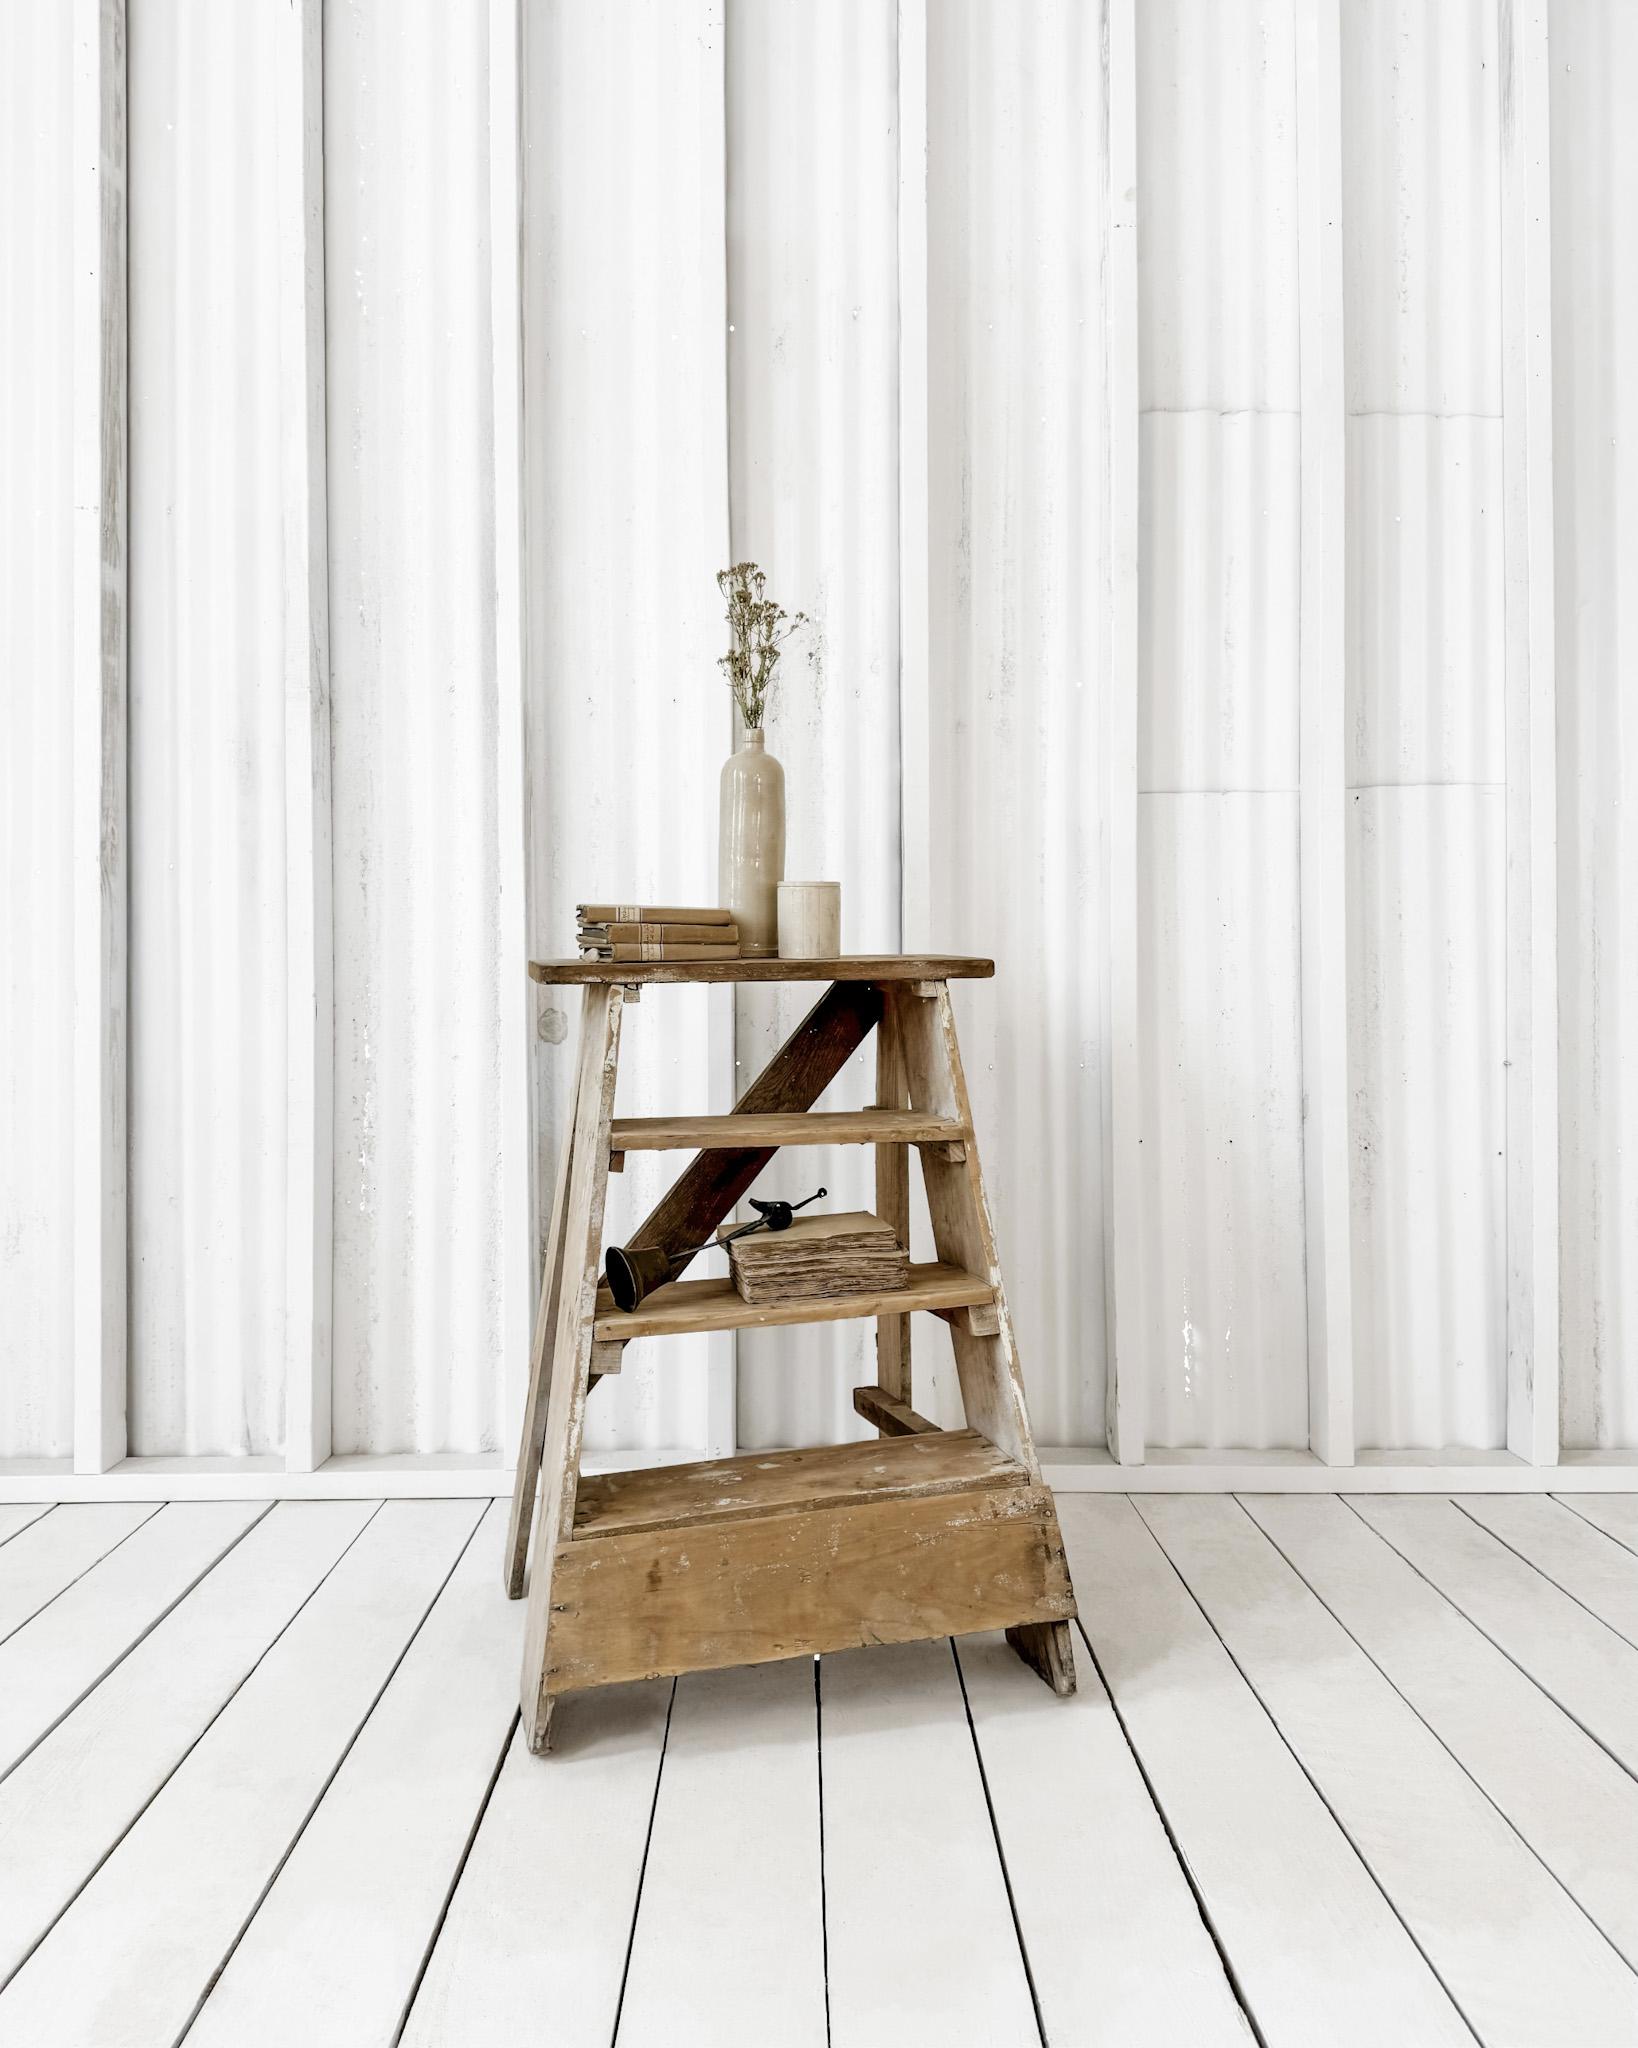 Sturdy and functional, this old handmade step stool would make a unique side table. 4 steps provide ample space to stow books and collectibles. Whether used in a bedroom or living room, its patinated bleached appearance and handsome lines make it a